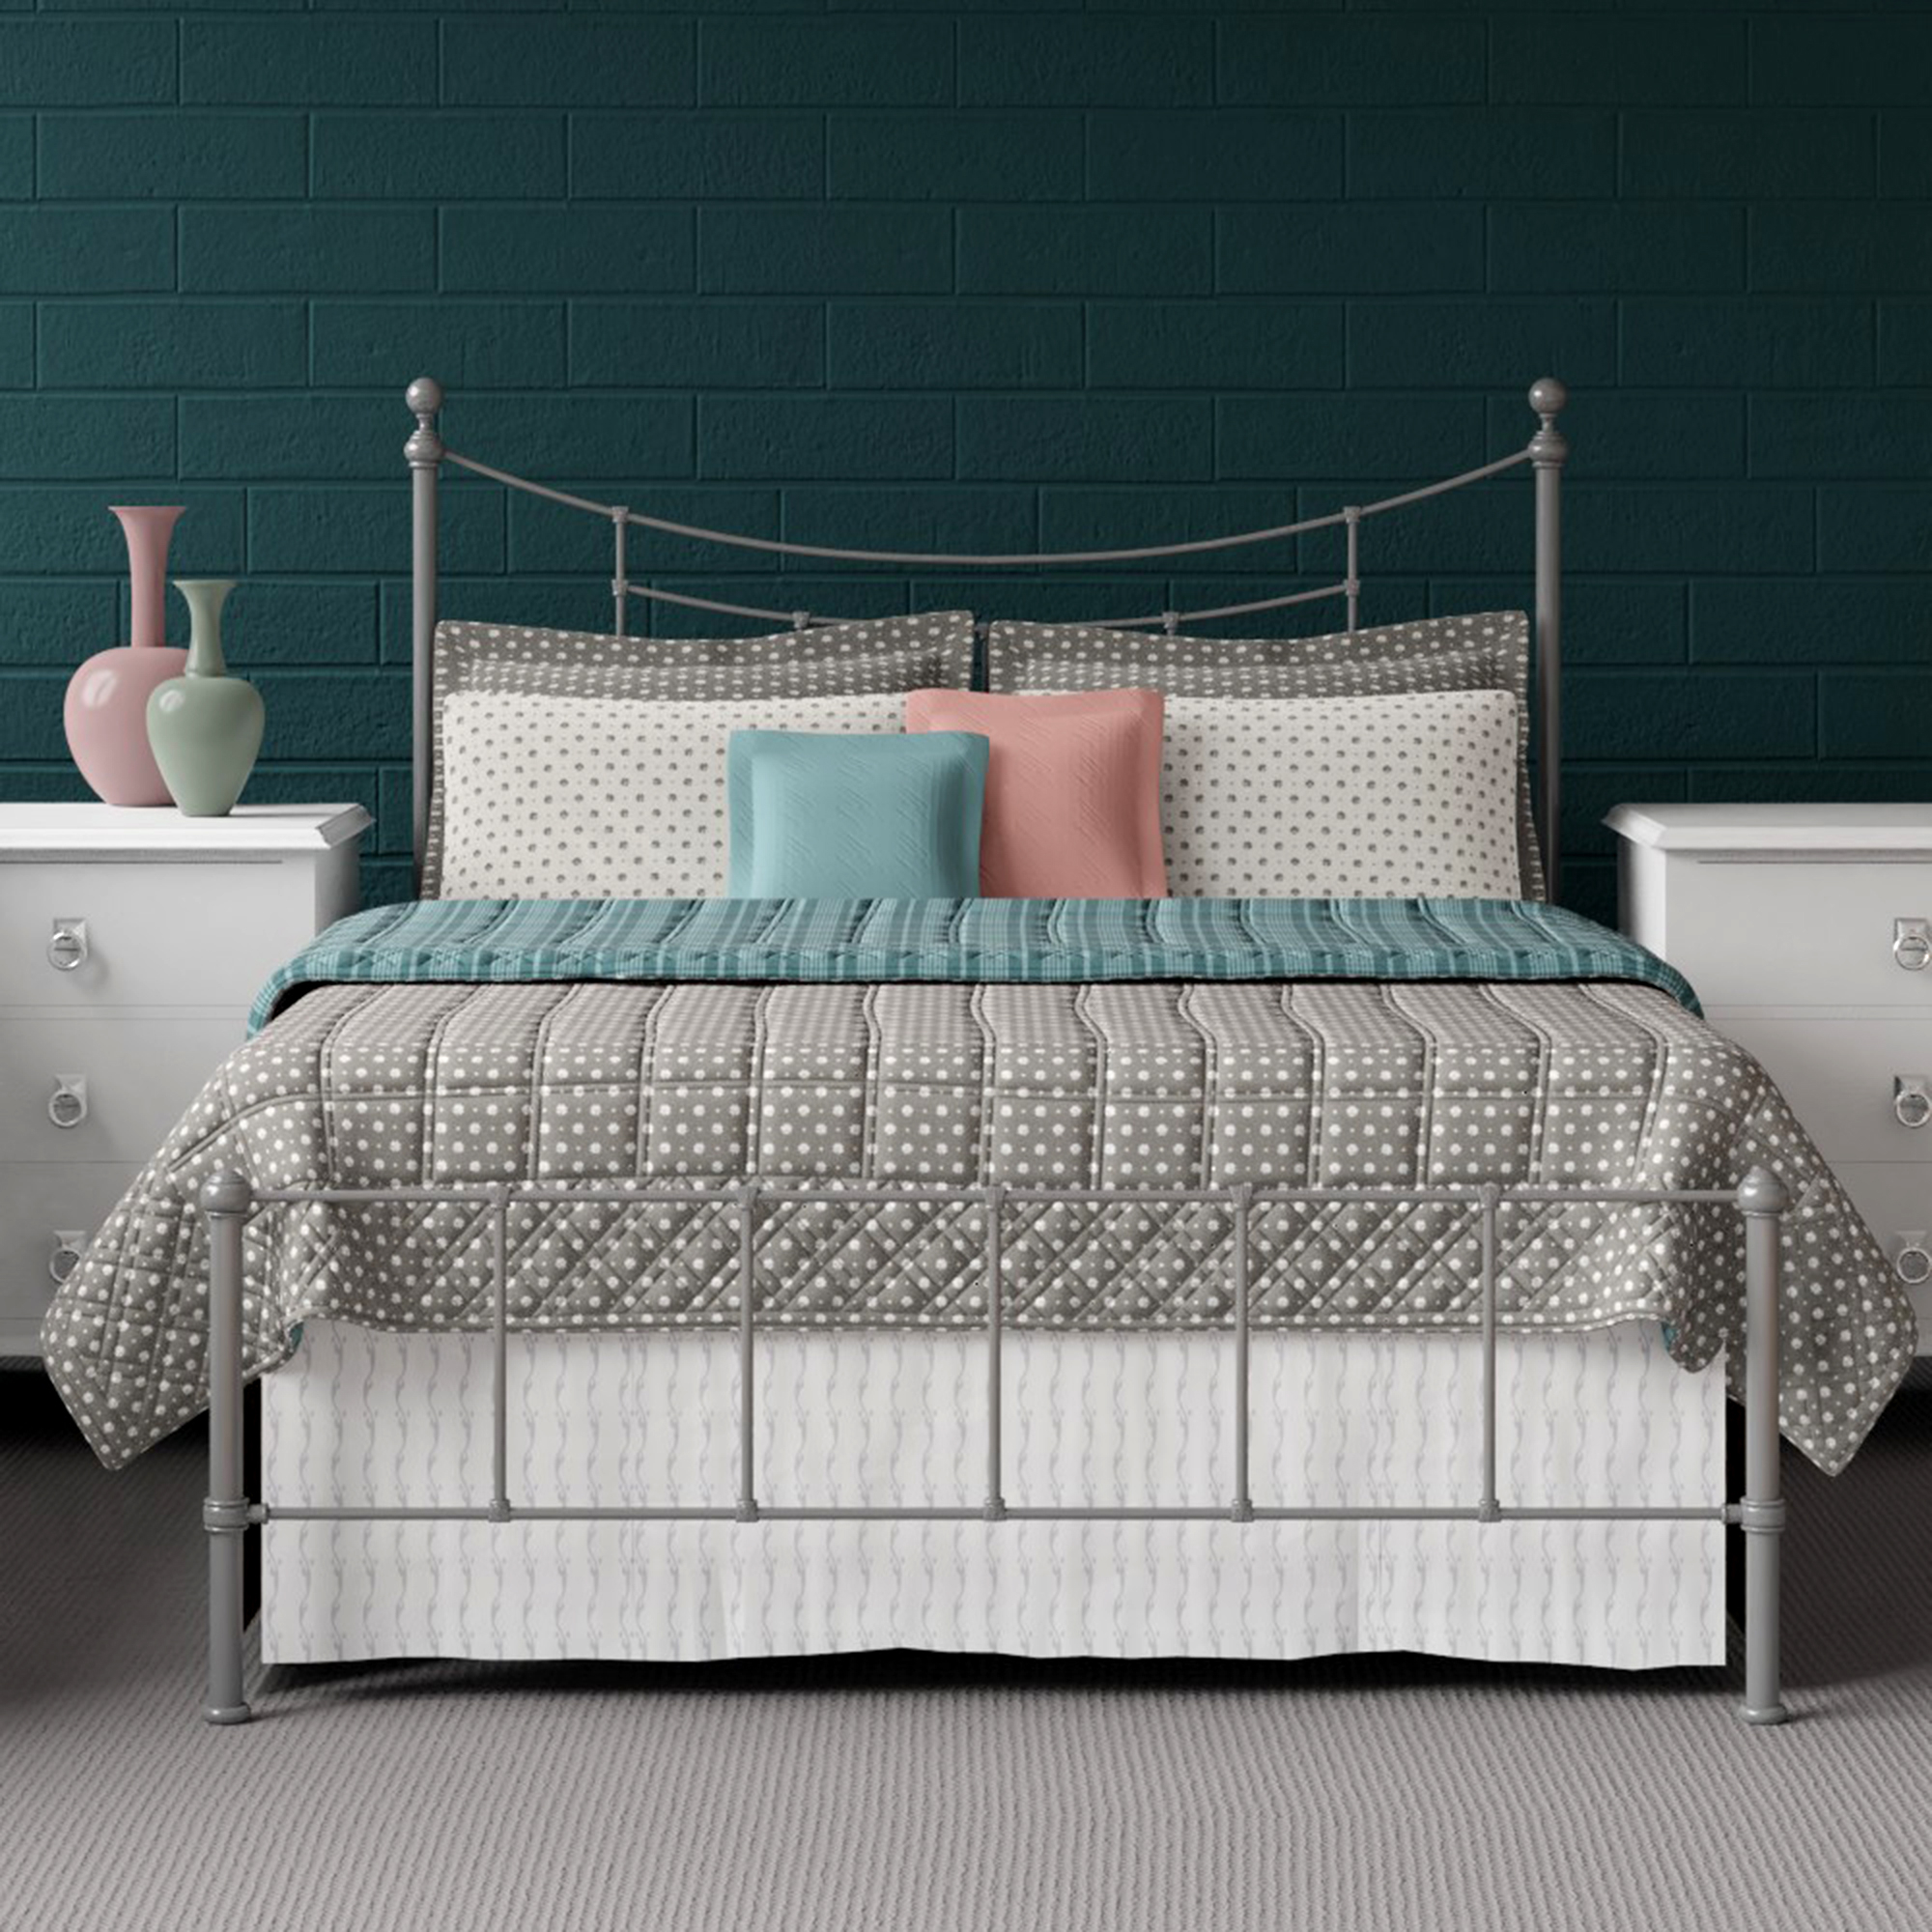 Isabelle iron bed - Image teal